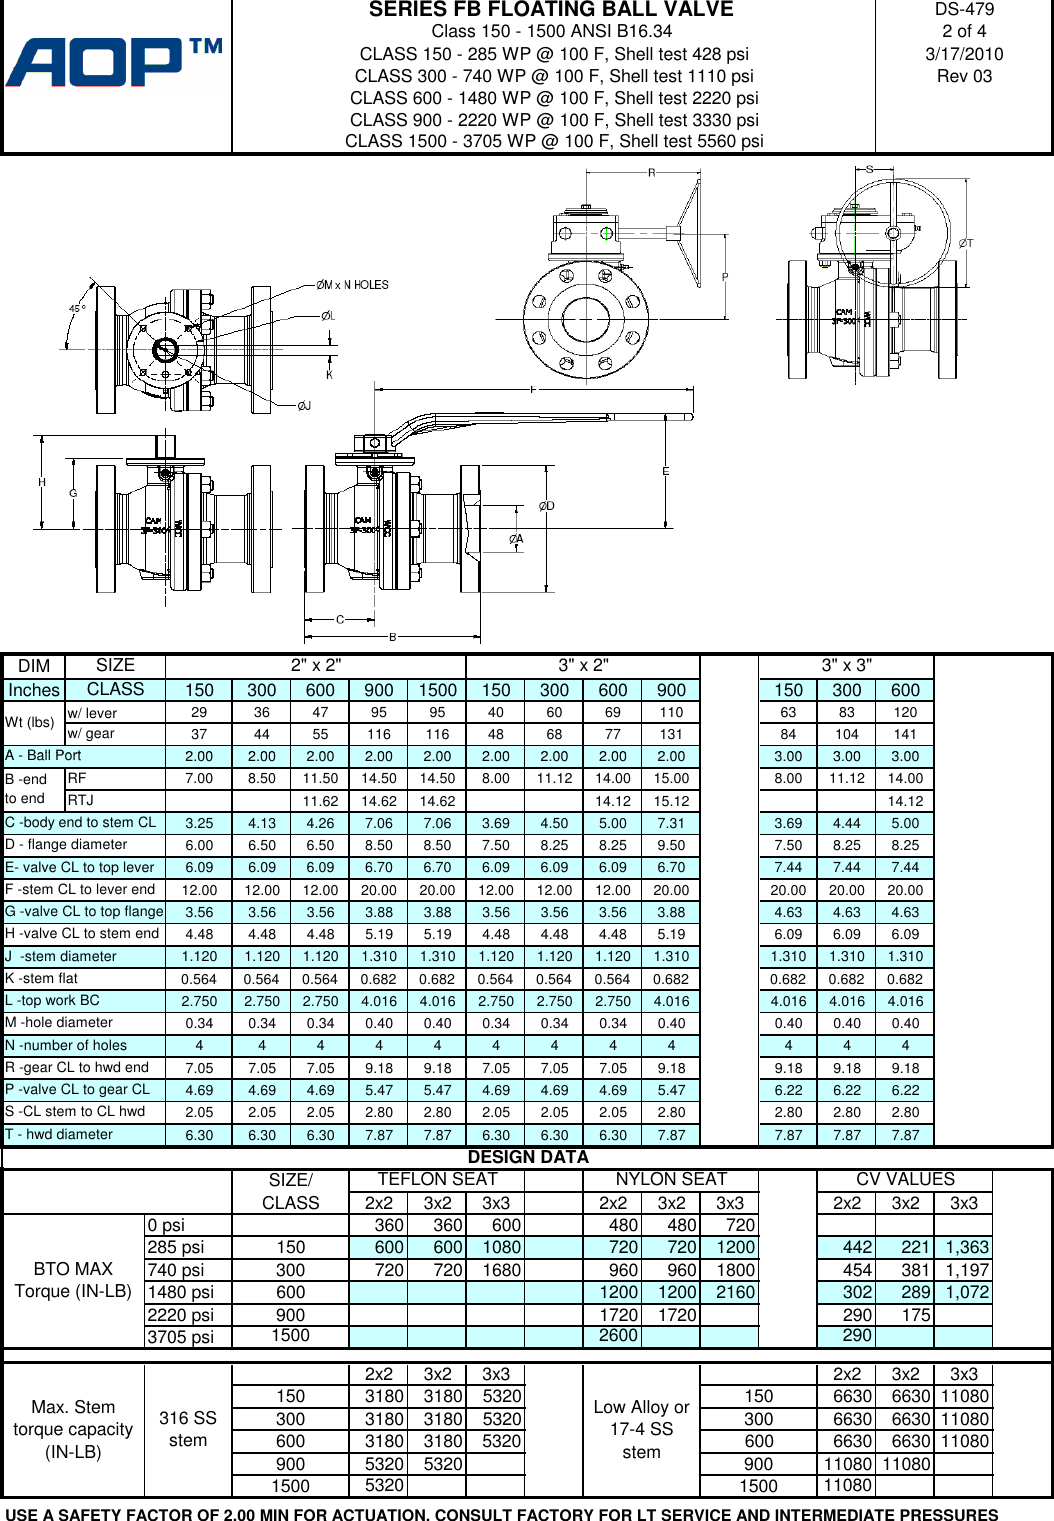 Page 2 of 4 - FB-DS-479-REV-03 AOP Series FB Floating Ball Valve Technical Drawing Aop-fb-technical-drawing